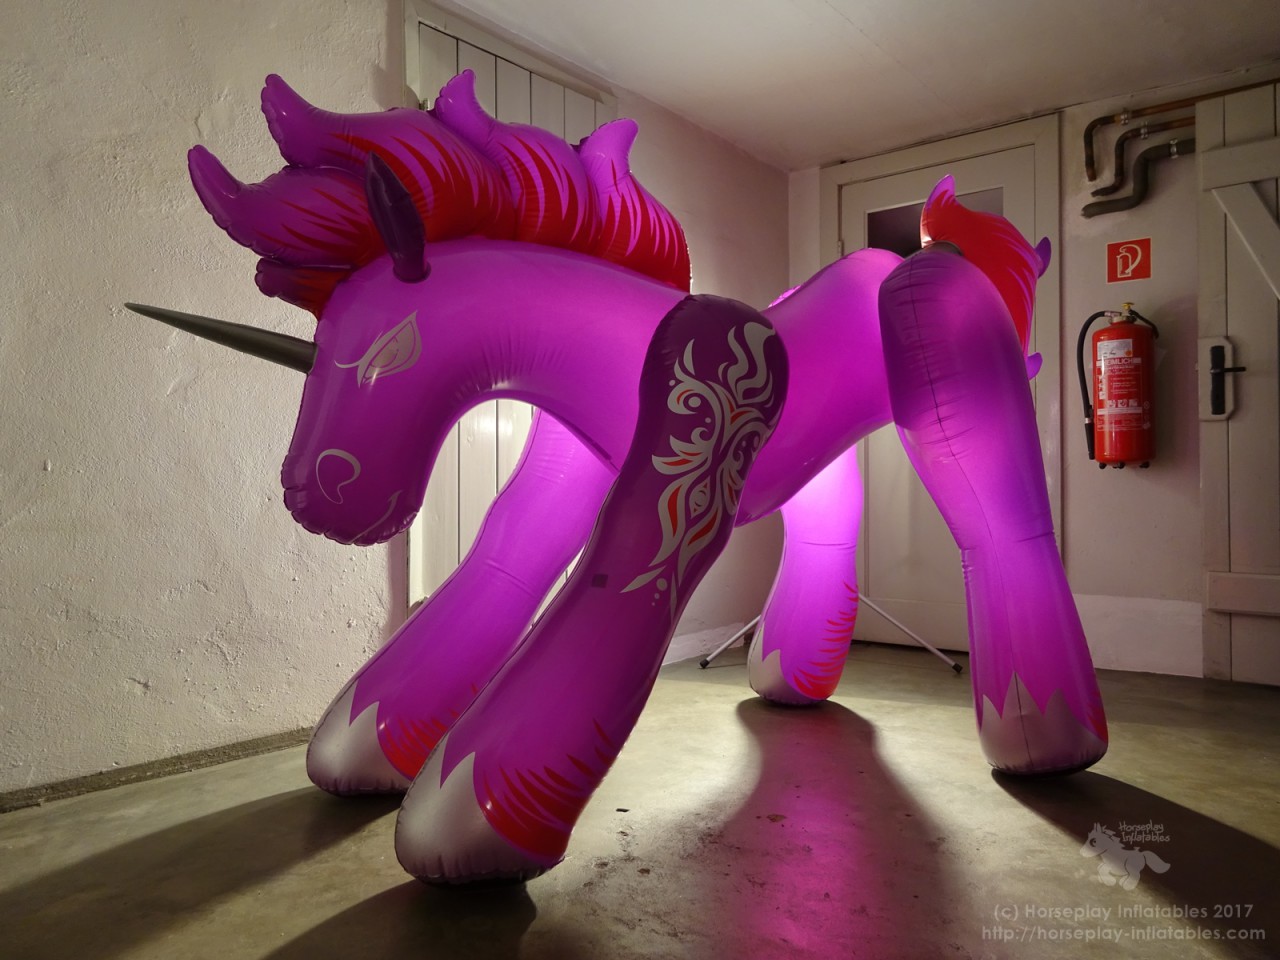 Horseplay inflatable